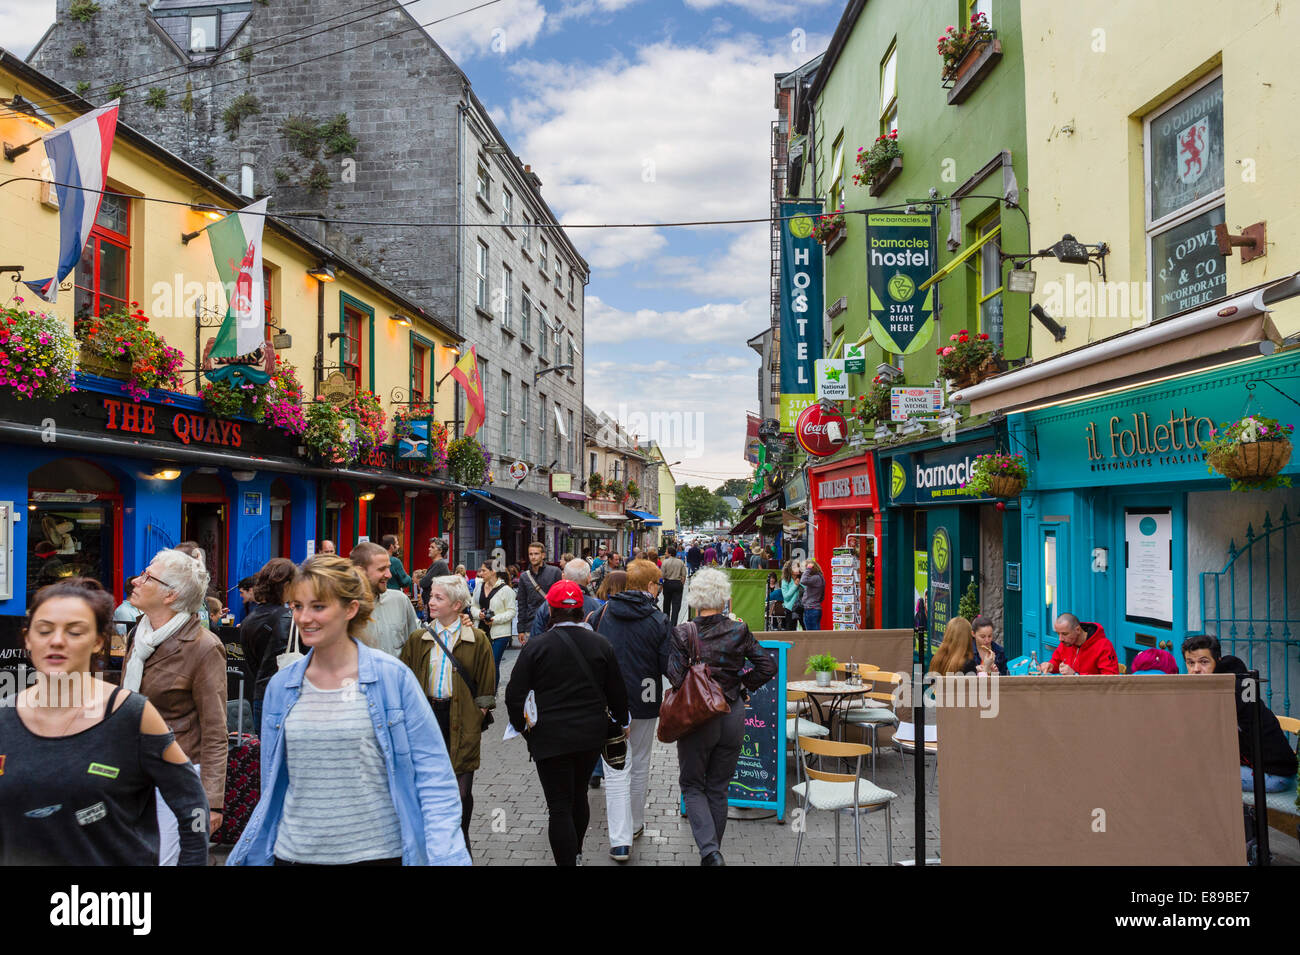 Pubs, restaurants and shops on Quay Street in Galway City Latin Quarter, County Galway, Republic of Ireland Stock Photo